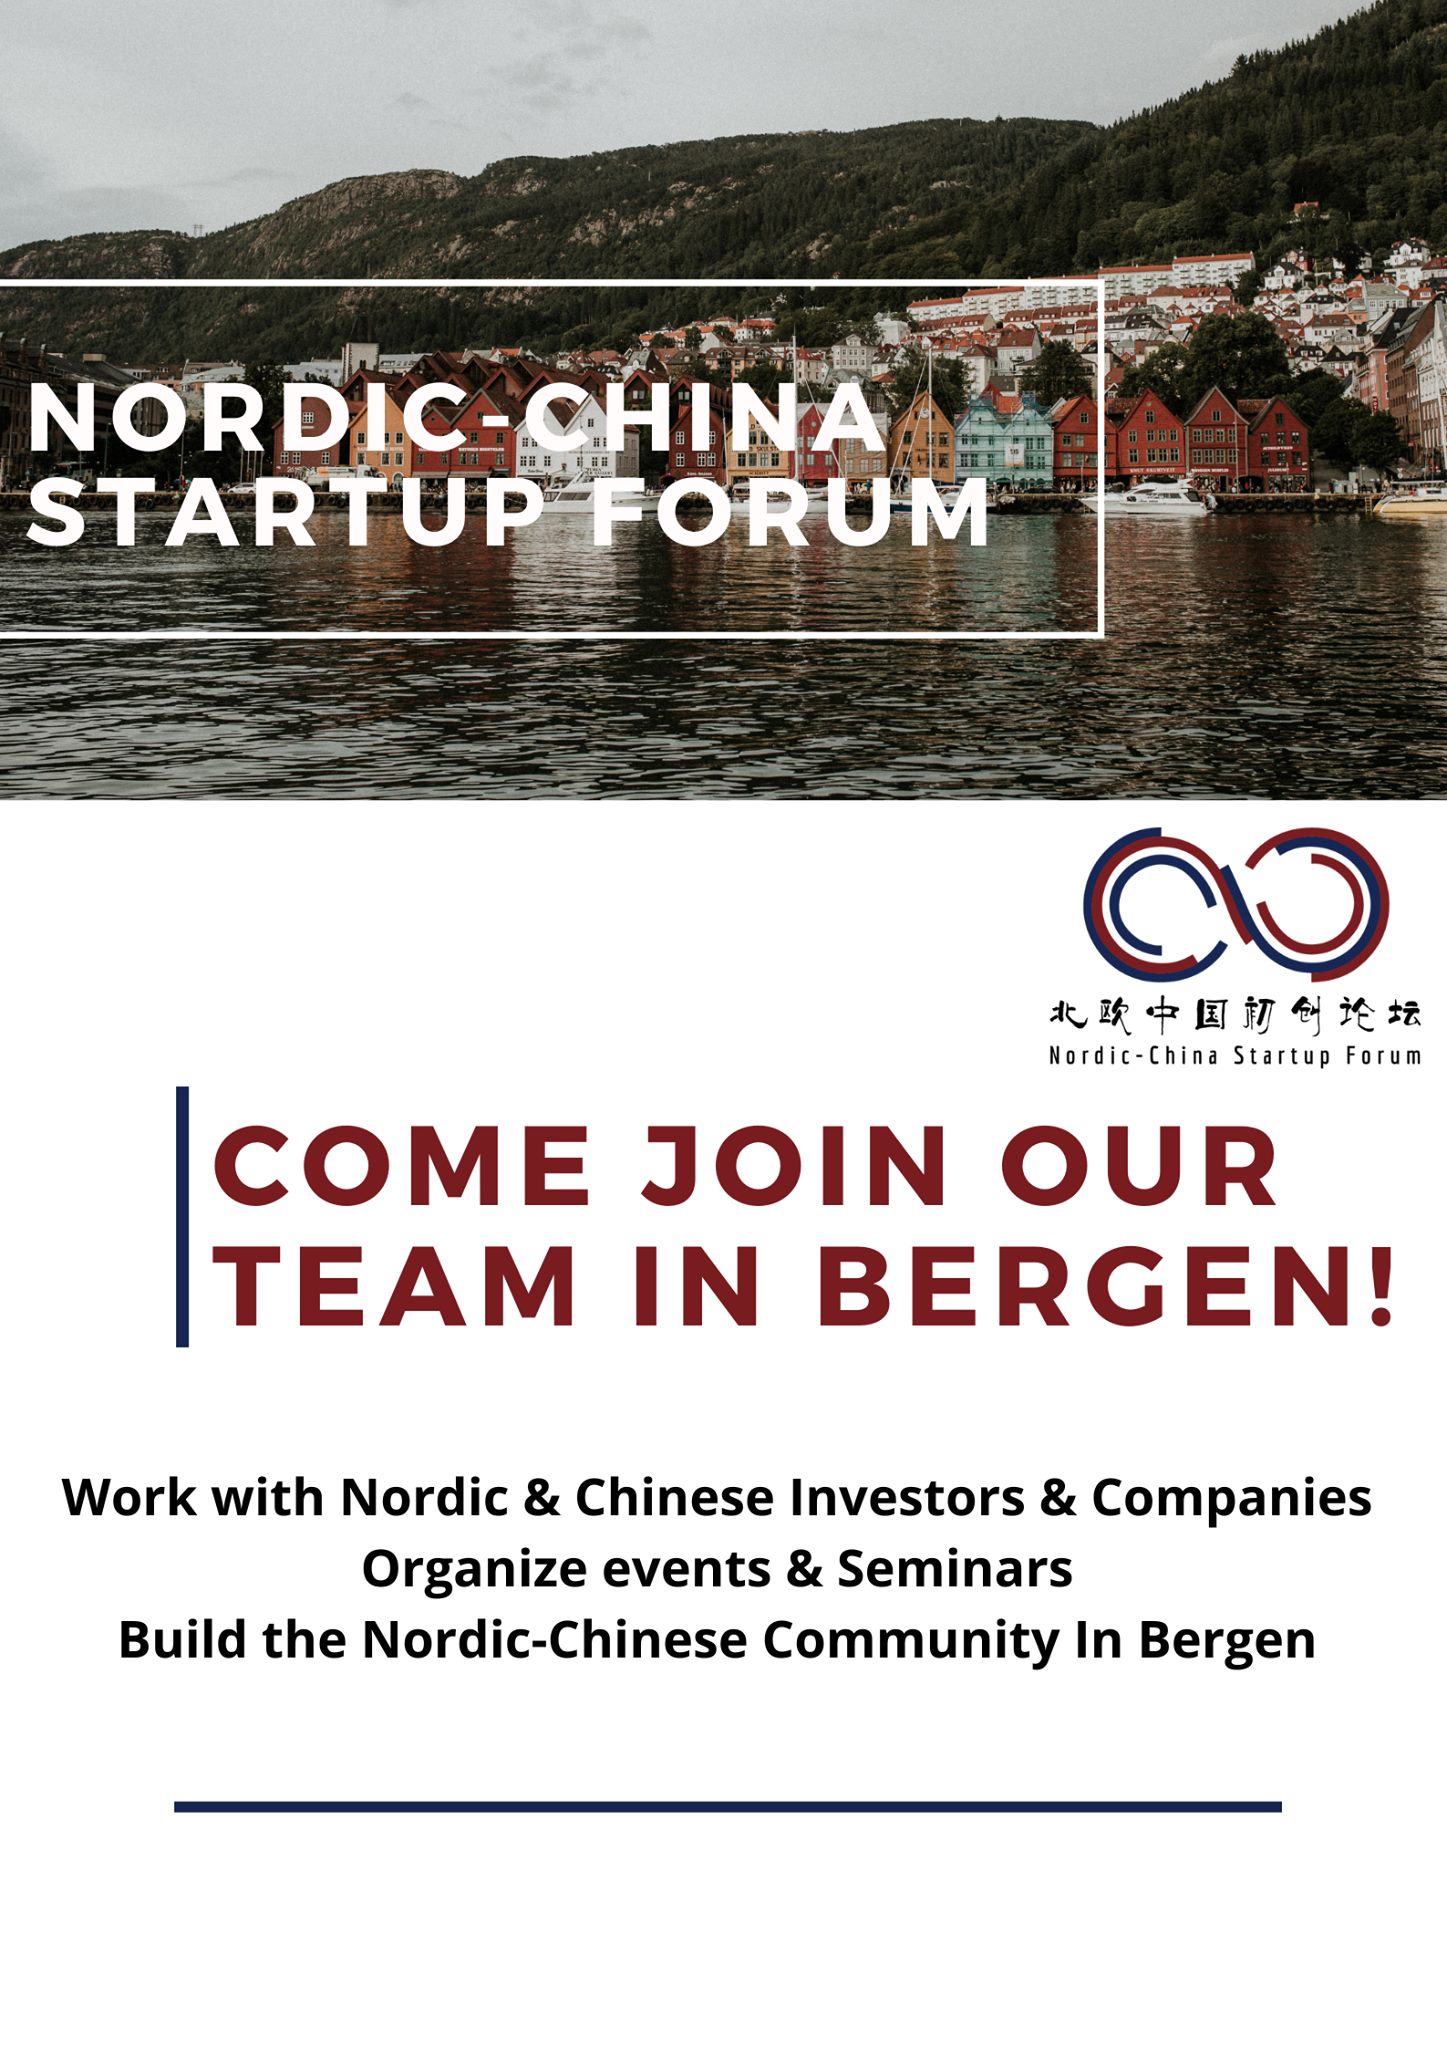 Nordic-China Startup Forum is looking for passionate team members in Bergen